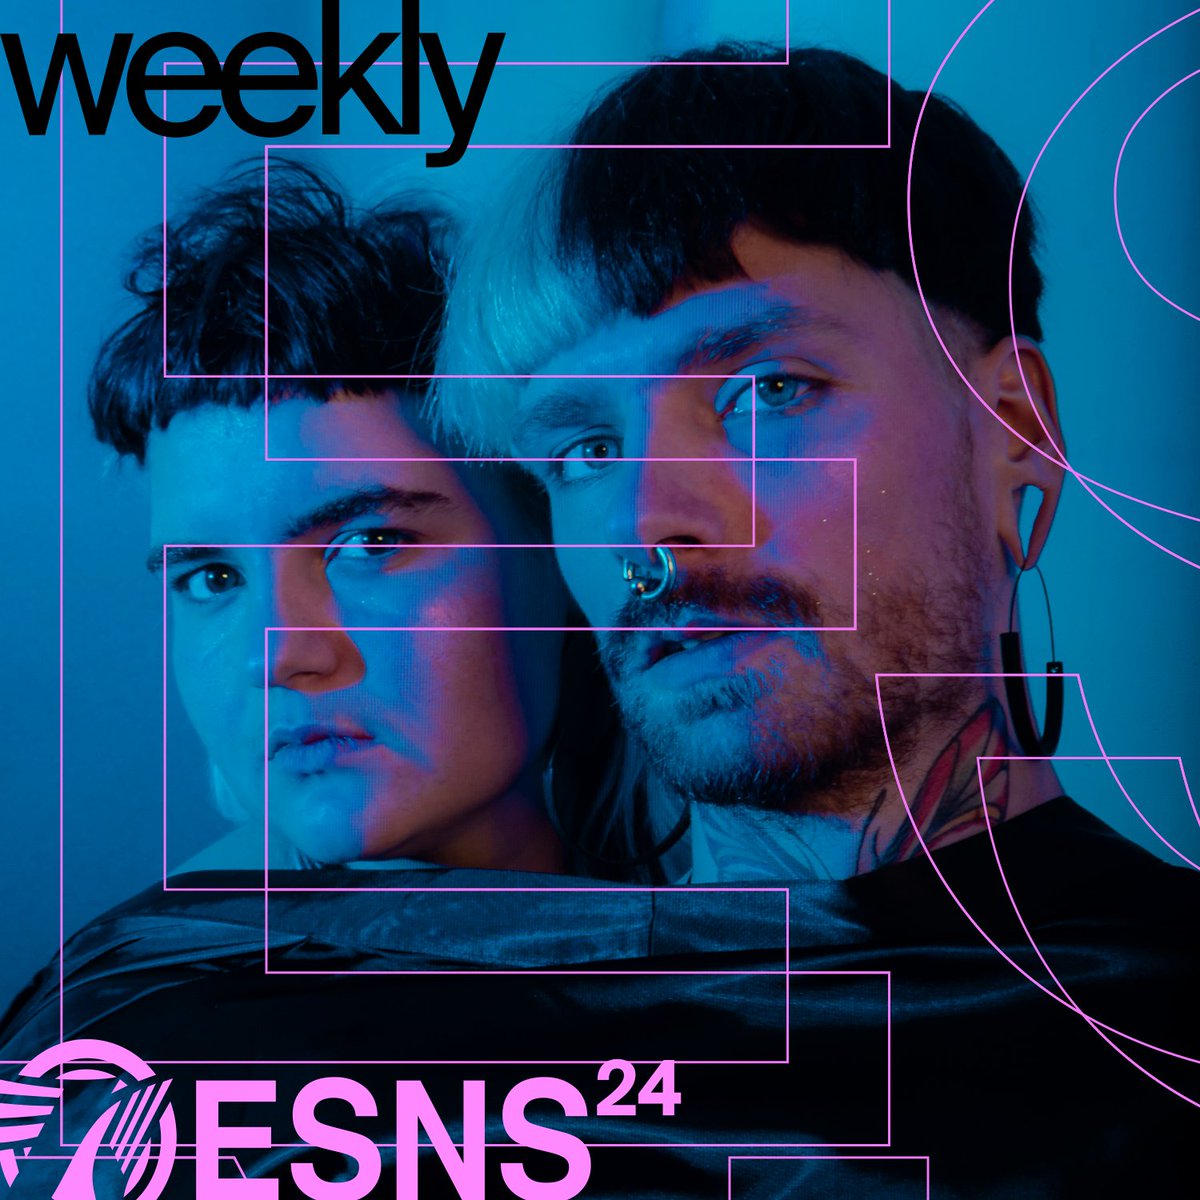 It's a great week to discover new music! New songs from ESNS24 artists Crème Solaire, @zoelivay, @Cashmyrar, BLUAI, Den Her Hale, Joon, Reinel Bakole, @MarynCharlie_ and more were added to the ESNS Weekly playlist. 🔗 sdz.sh/T18YgK